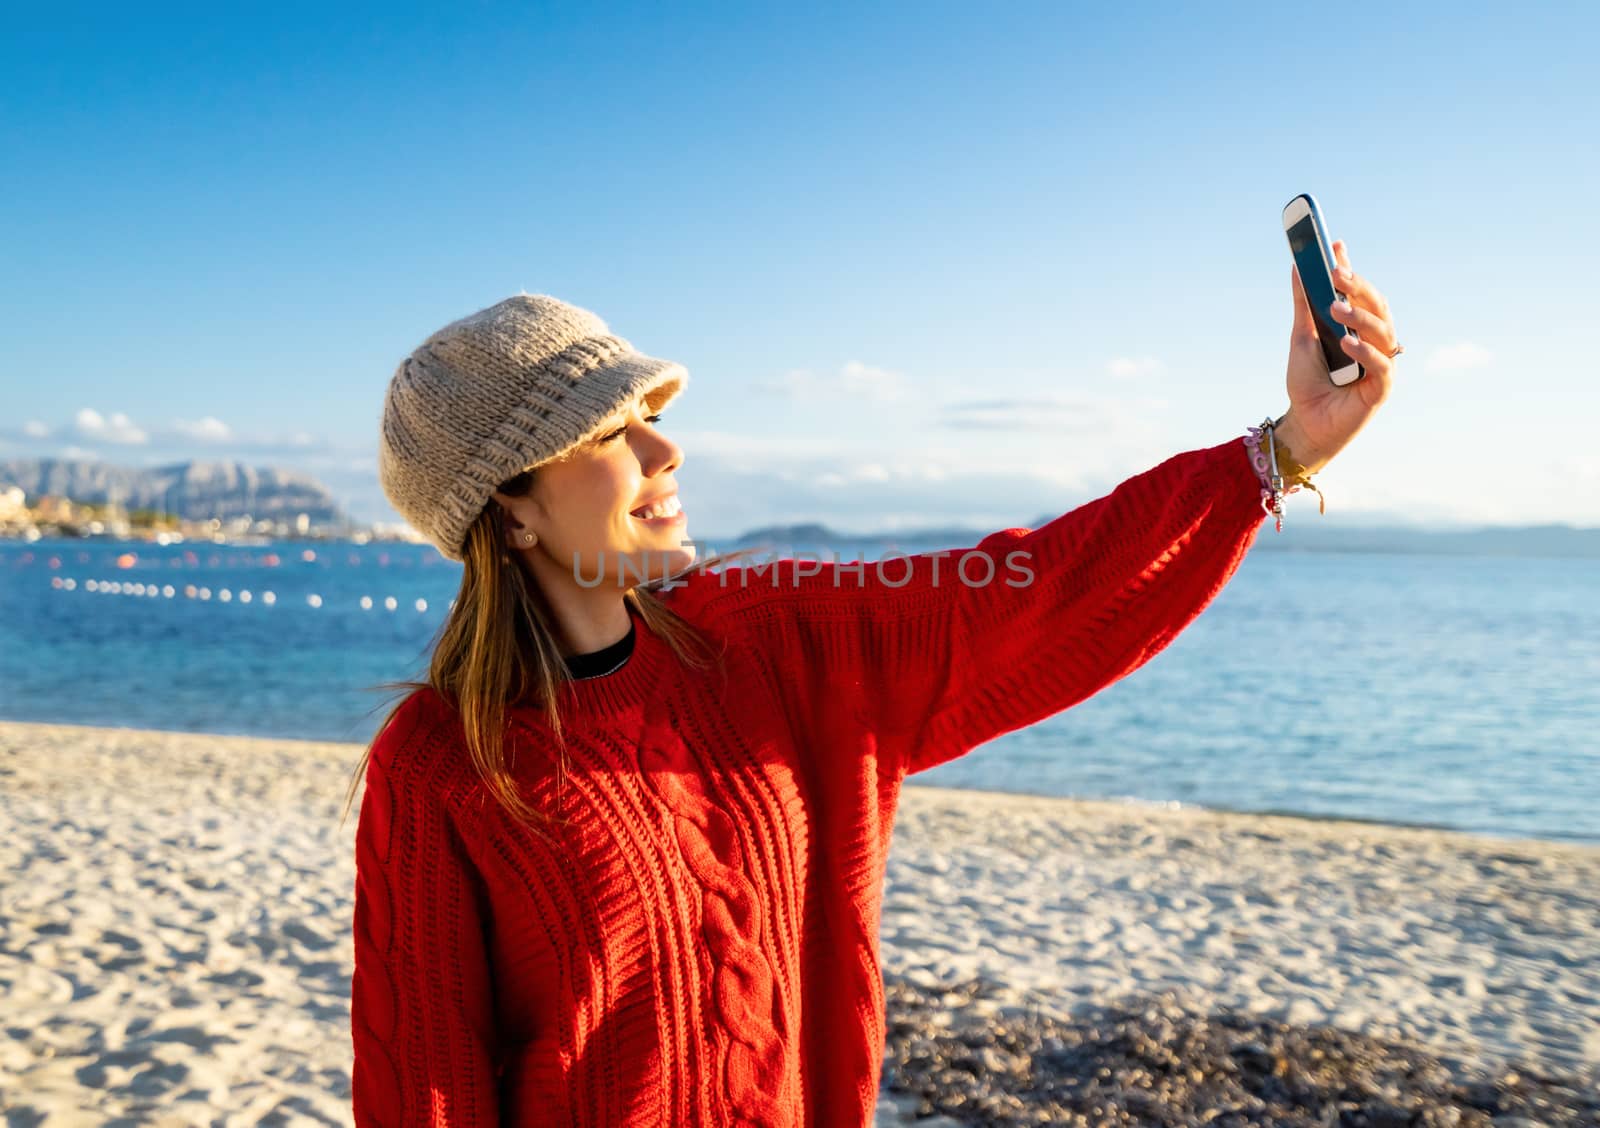 Beautiful young caucasian woman solo traveller make a self portrait herself on the beach at sunset or dawn - Alone female person smiling looking at the phone doing a video call in winter sea vacation